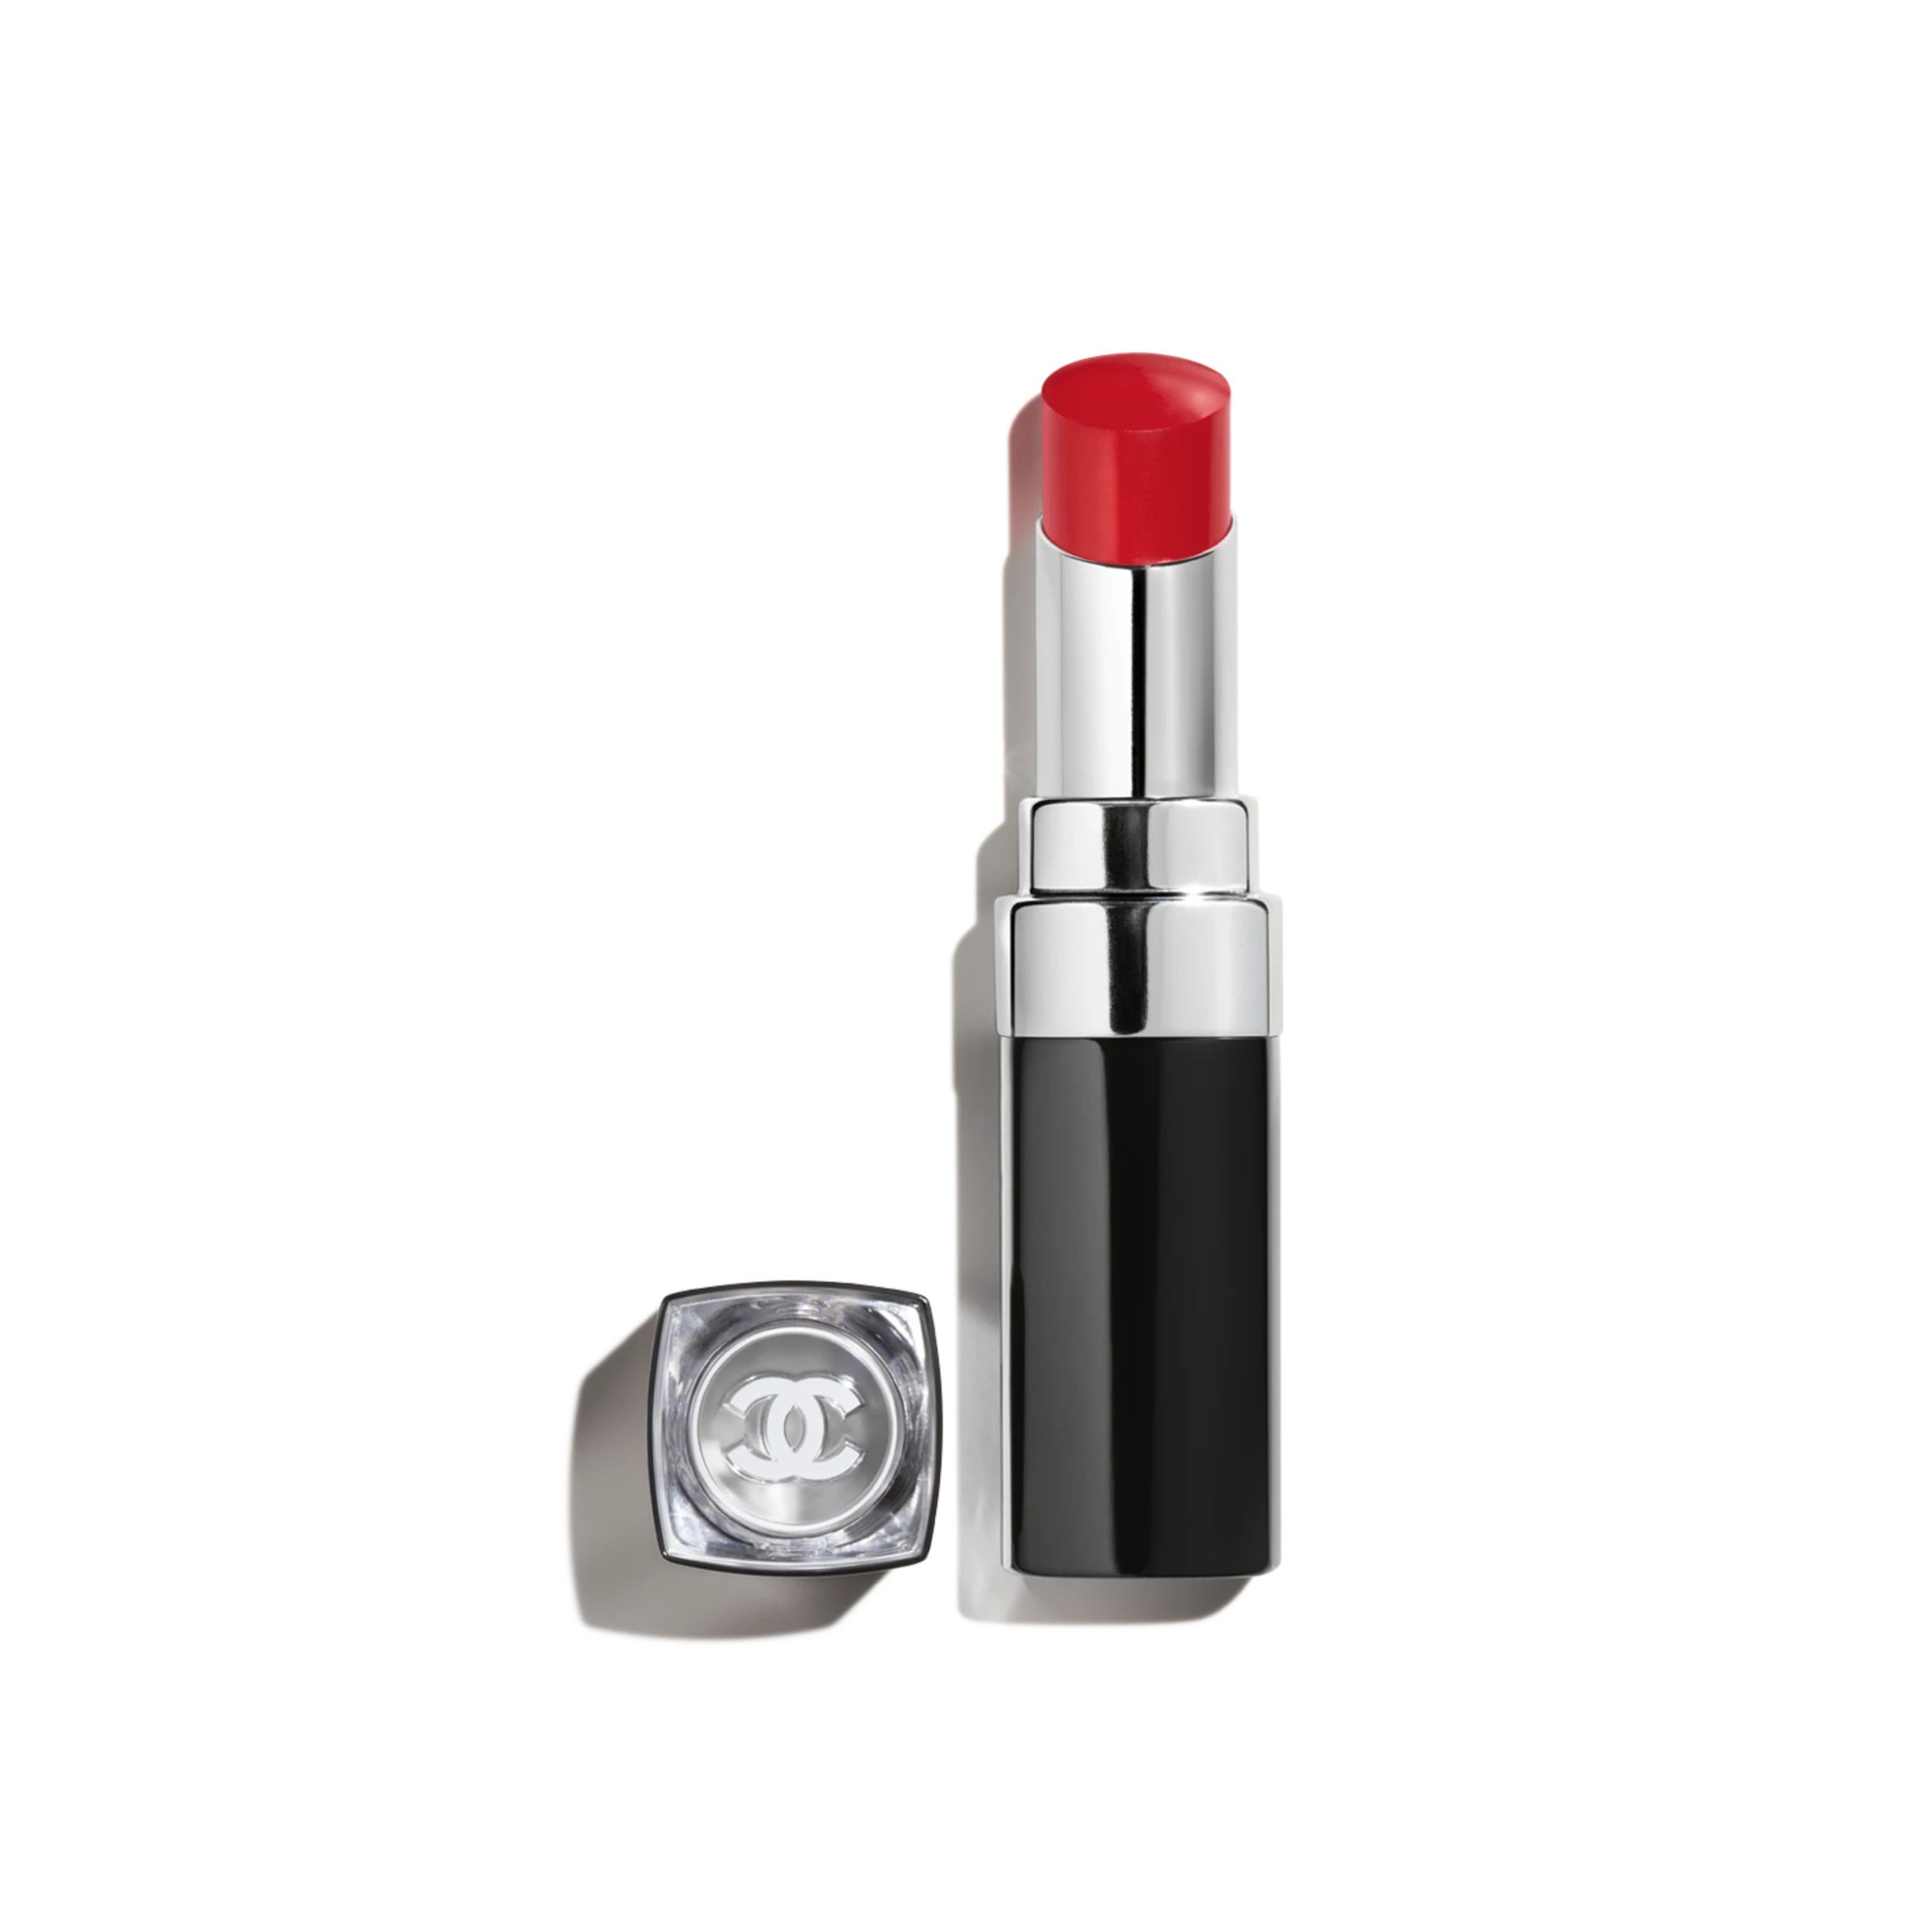 ROUGE COCO BLOOM Hydrating plumping intense shine lip colour 156 - Warmth | CHANEL | Chanel, Inc. (US)